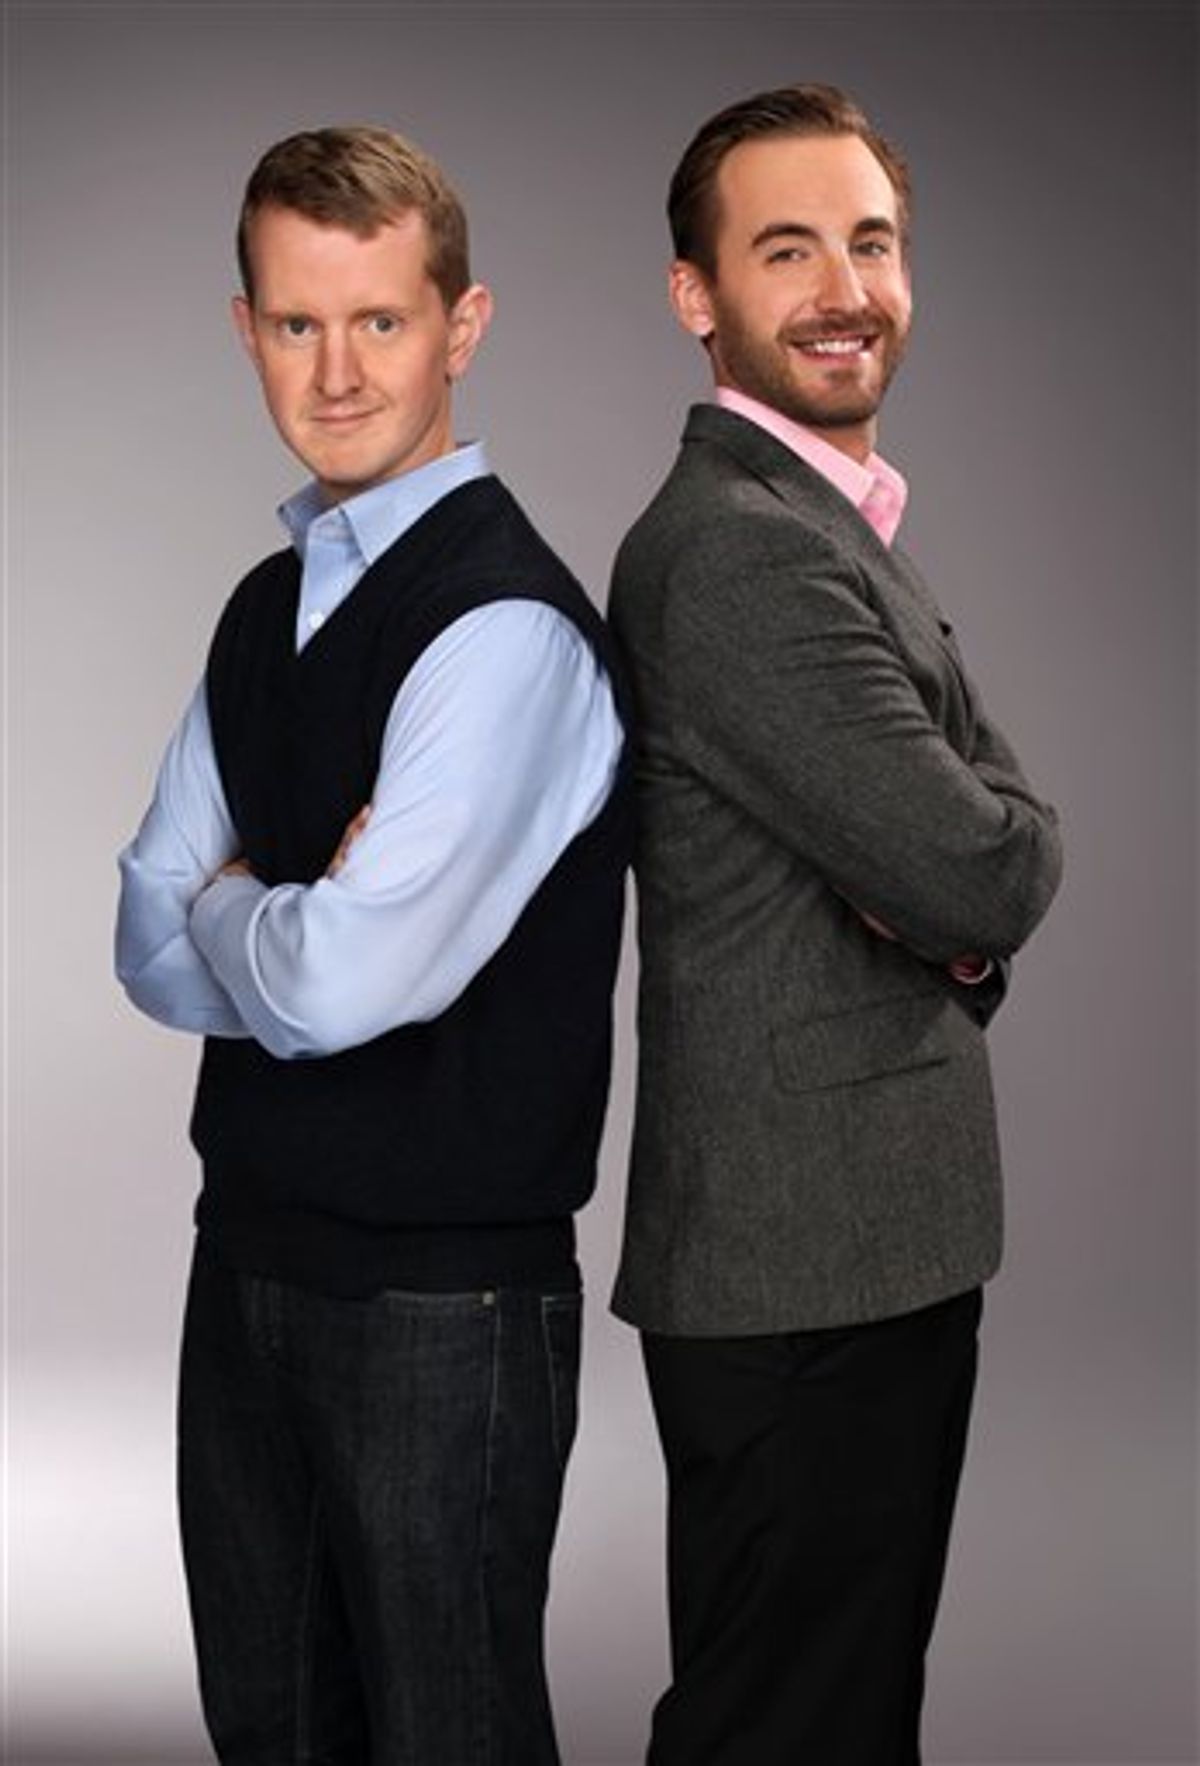 In this undated publicity image released by Jeopardy!, Ken Jennings, left, and Brad Rutter, two of the most successful contestants on the game show "Jeopardy!," are shown. Jennings and Rutter two of the venerable game show's most successful champions, will play two games against "Watson," a computer program developed by IBM's artificial intelligence team. The matches will be spread over three days that will air Feb. 14-16, the game show said on Tuesday, Dec. 14, 2010. (AP Photo/Jeopardy!, Charles William Bush) (AP)